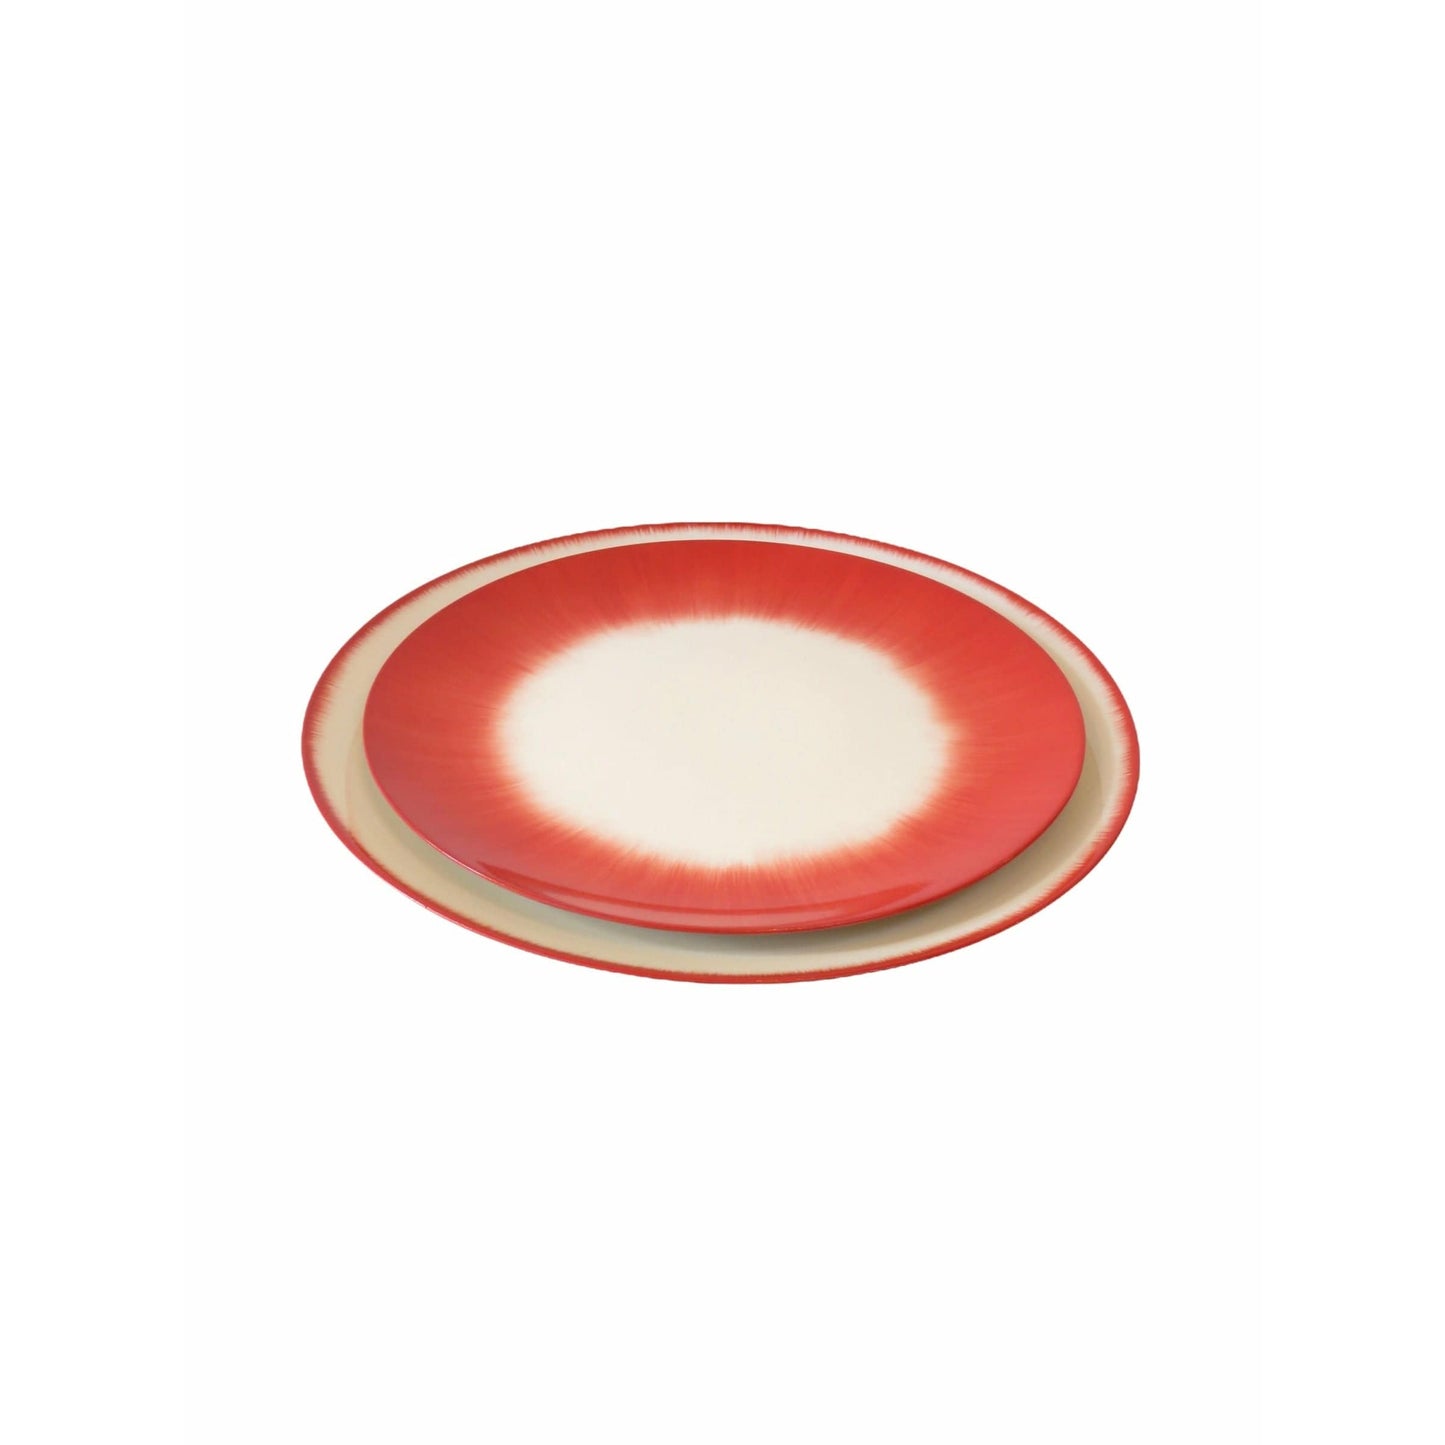 Ann Demeulemeester Home Home 24 centimeters / Off-white & red / Porcelain Ann Demeulemeester for Serax 24 cm plates (set of two)